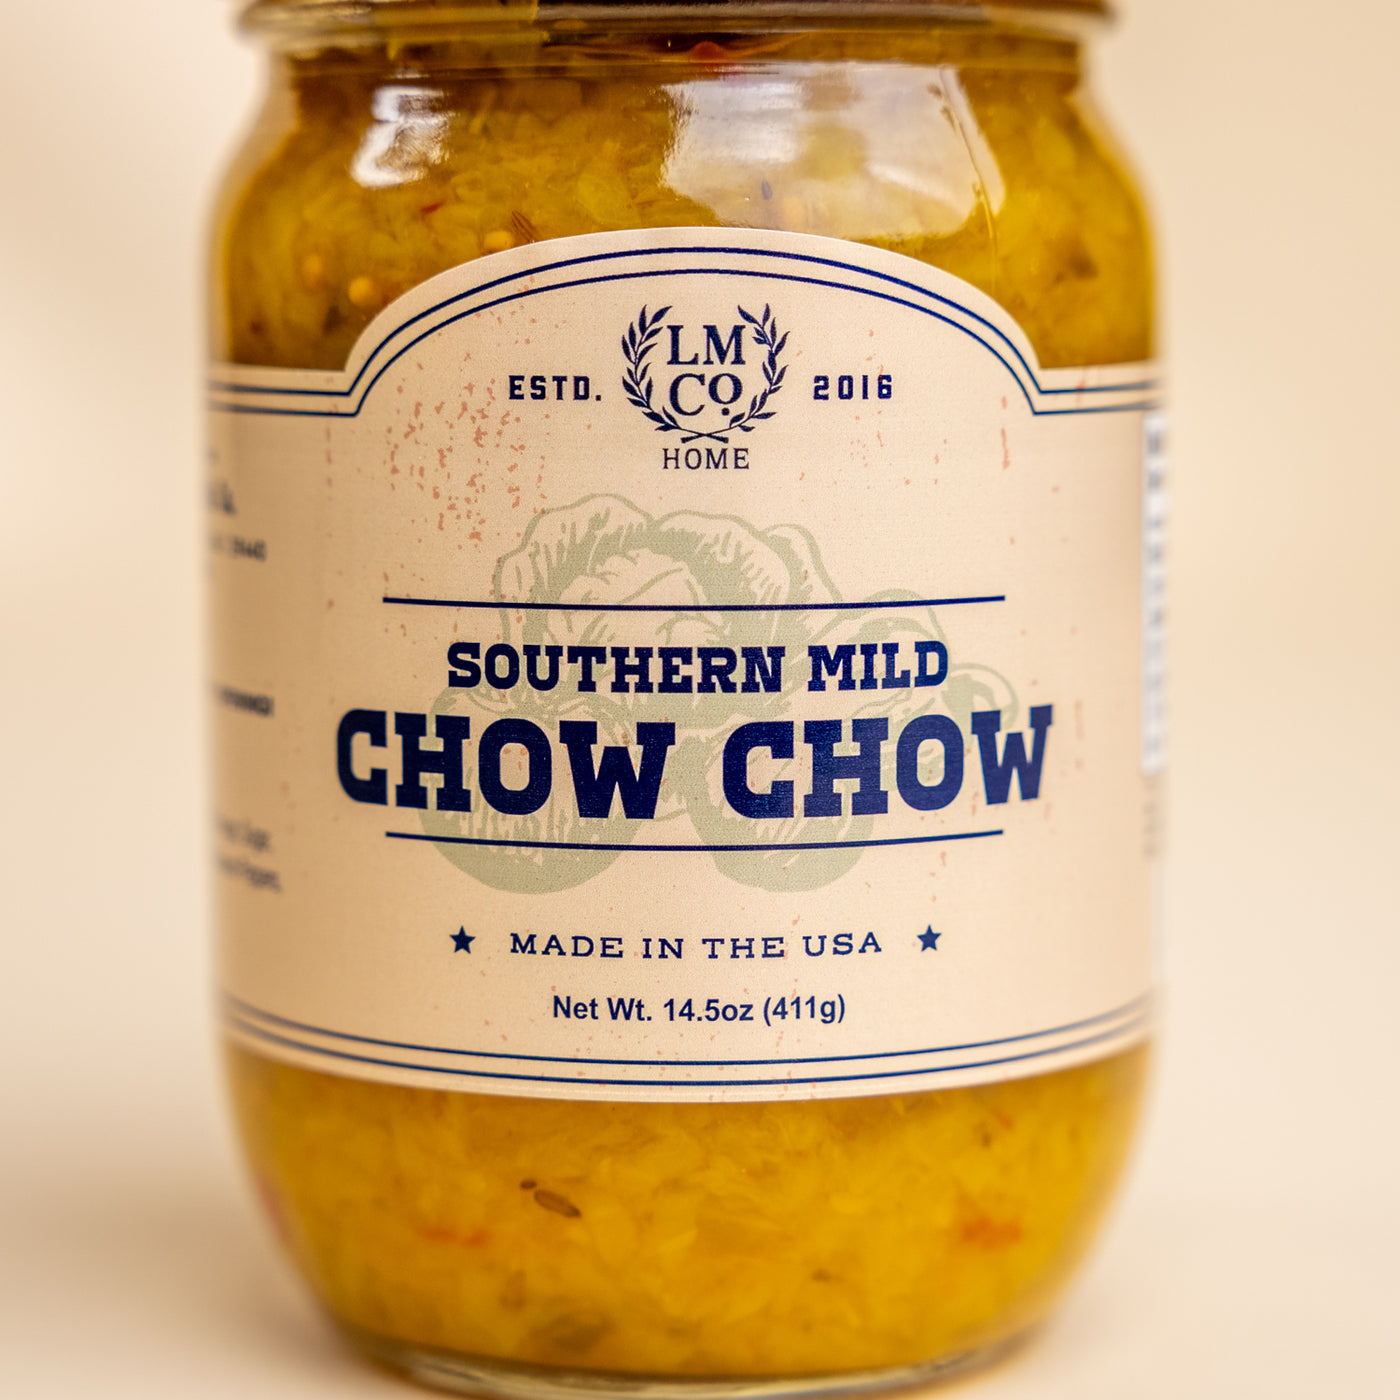 LMCo. Southern Mild Chow Chow